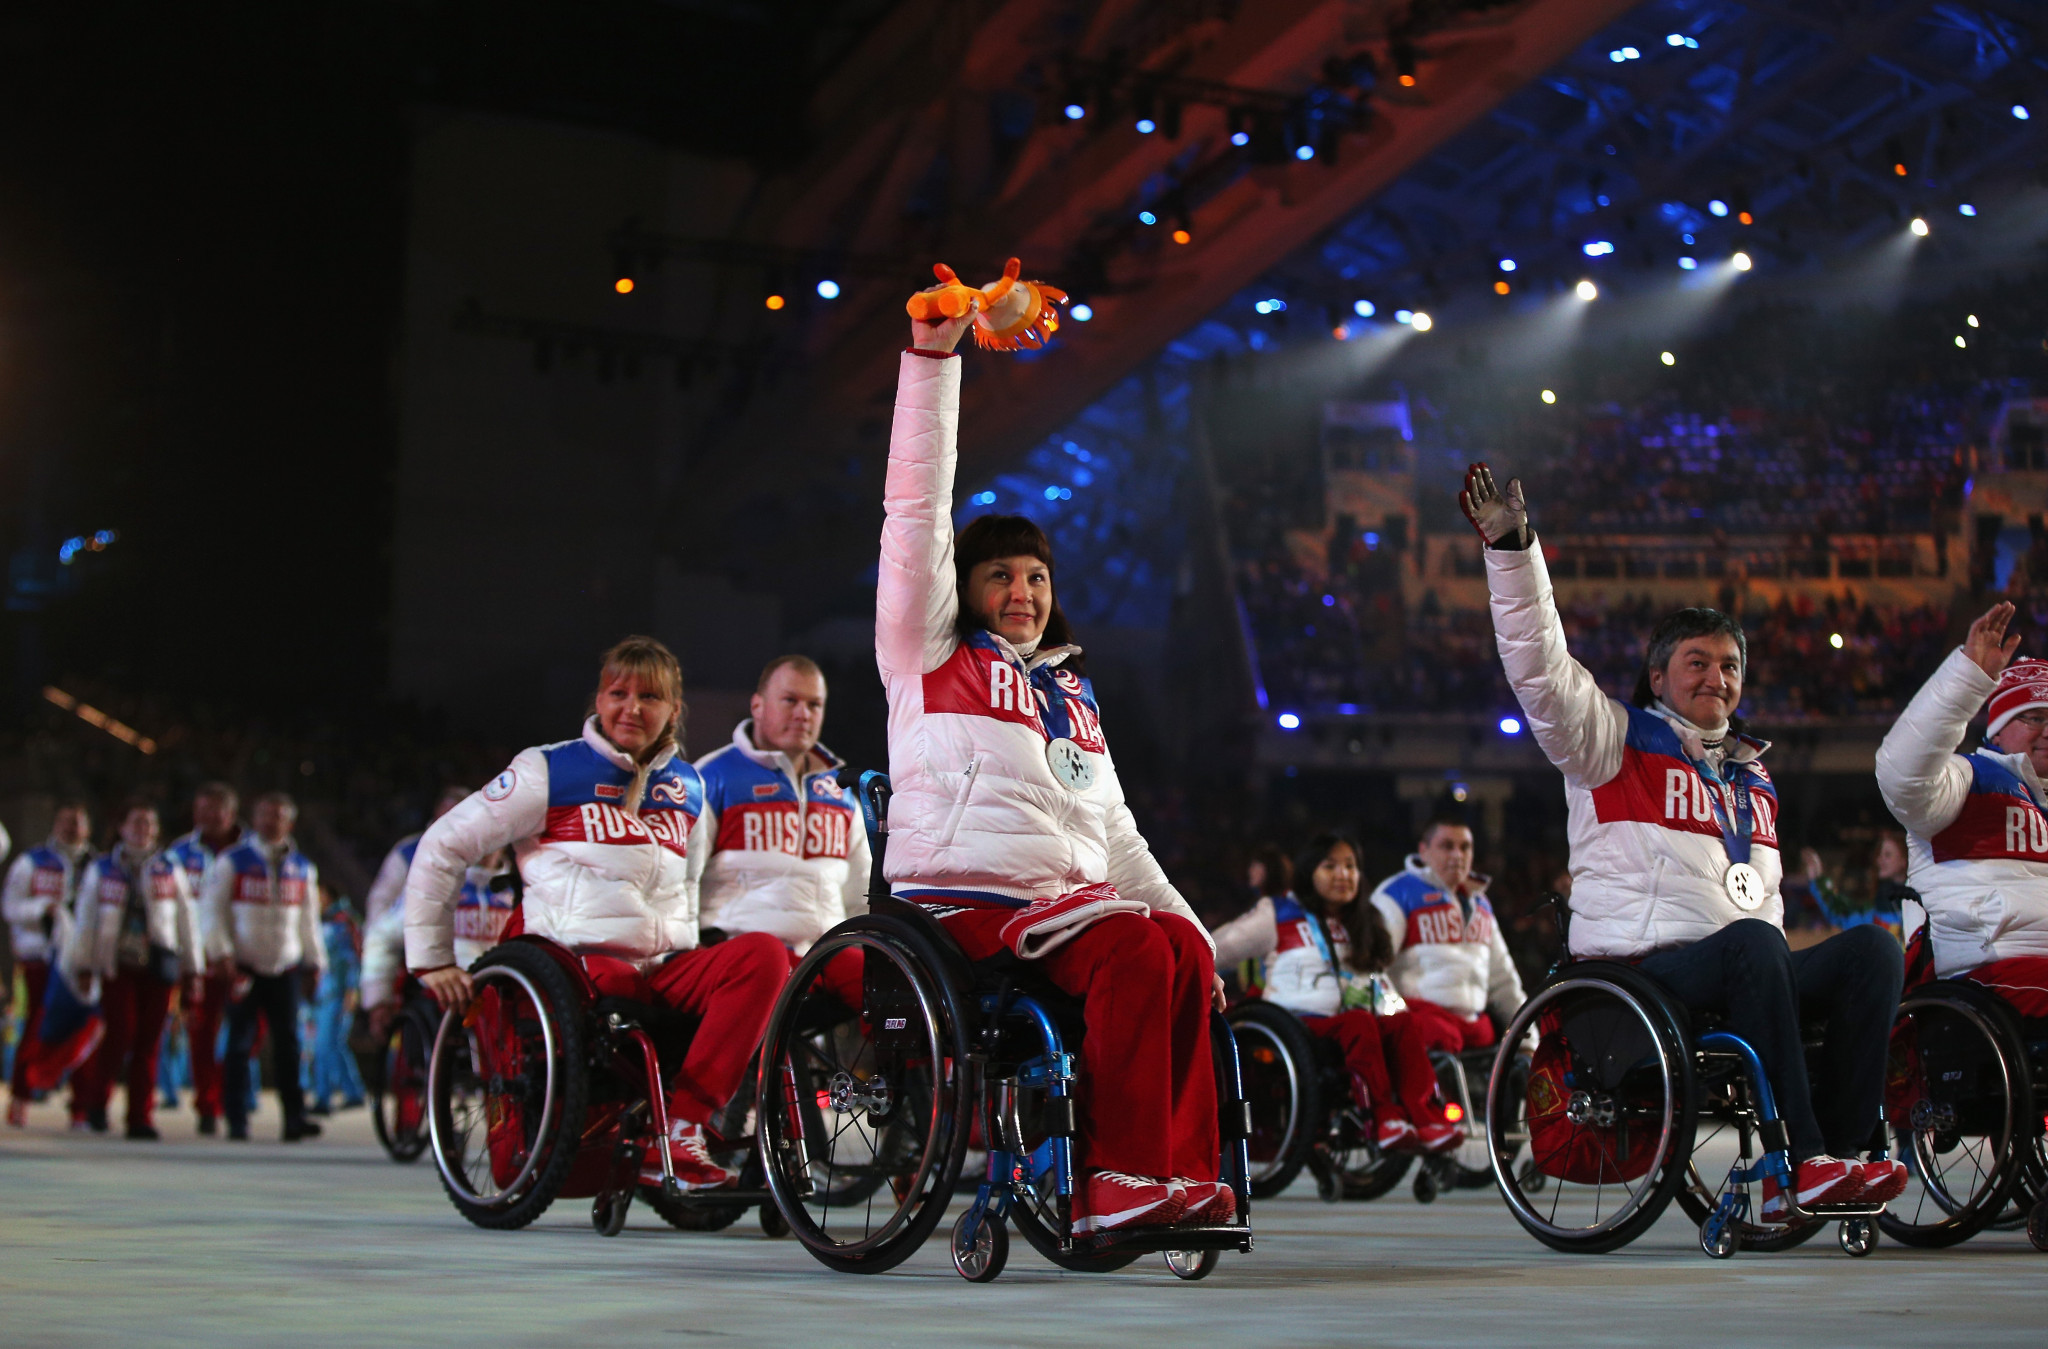 Urgent drug tests called for as Russians bid to compete in Pyeongchang 2018 Paralympic qualifiers